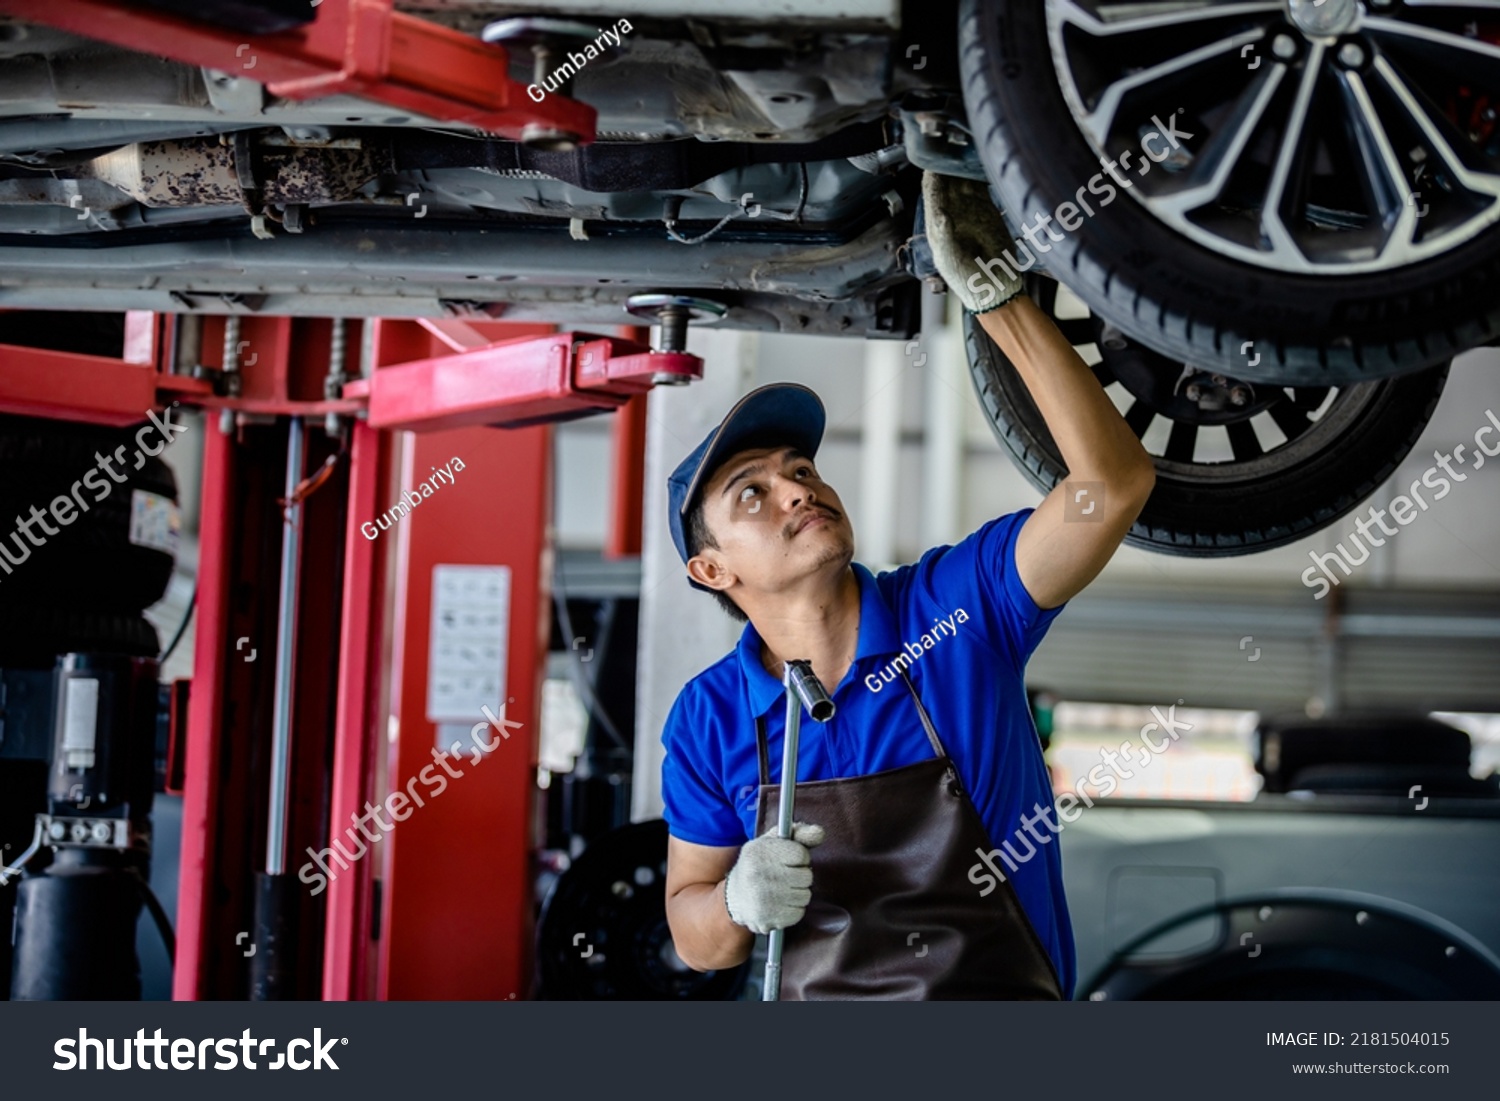 Auto mechanic repairman using a socket wrench working auto suspension repair in the garage, change spare part, check the mileage of the car, checking and maintenance service concept. #2181504015